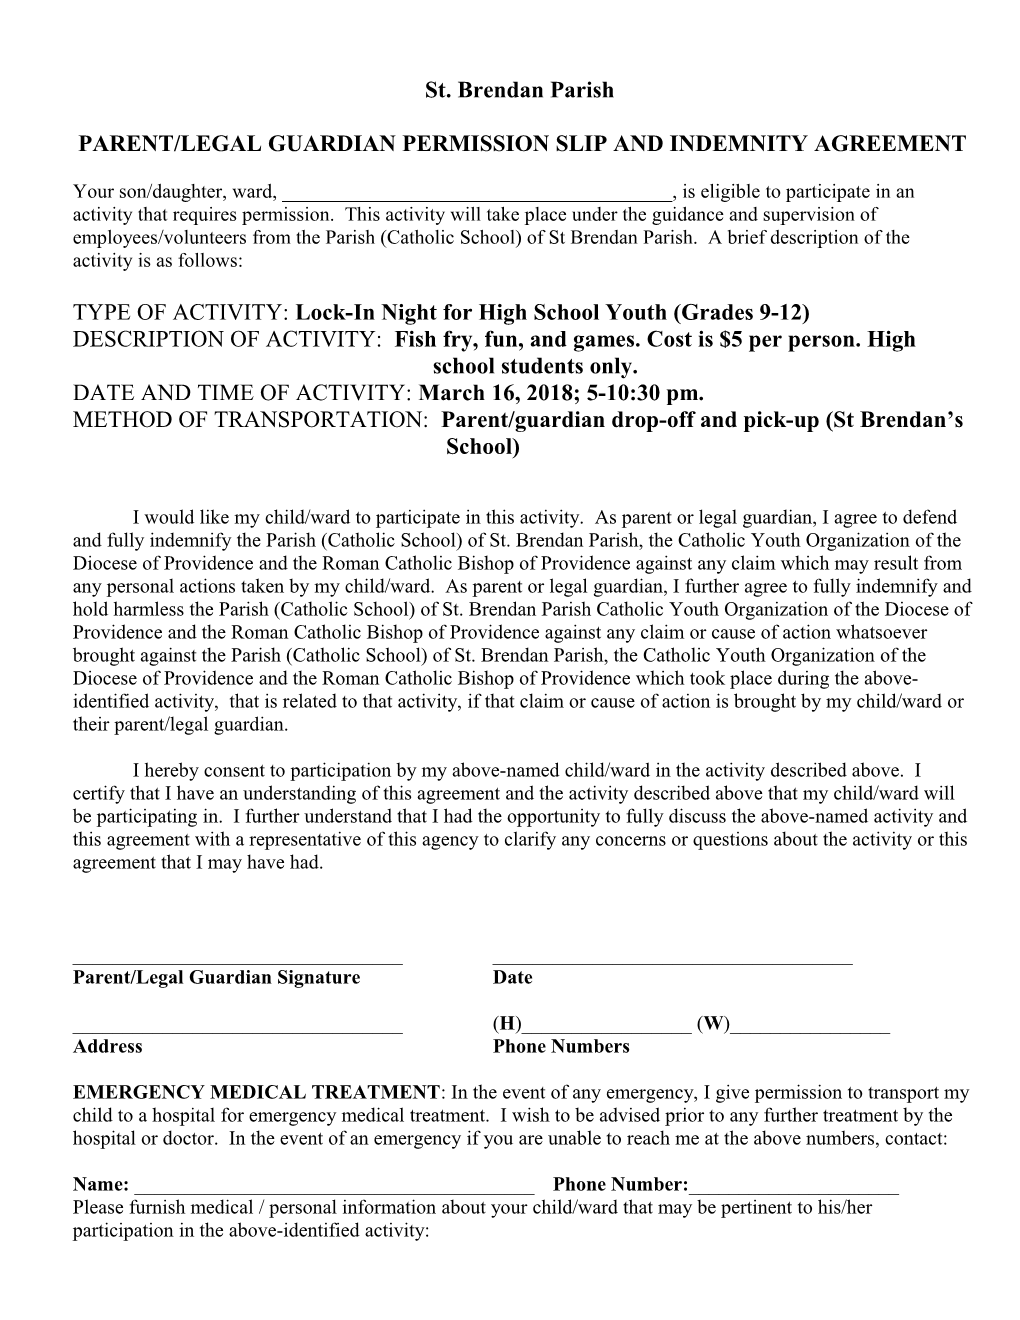 Parent/Legal Guardian Permission Slip and Indemnity Agreement